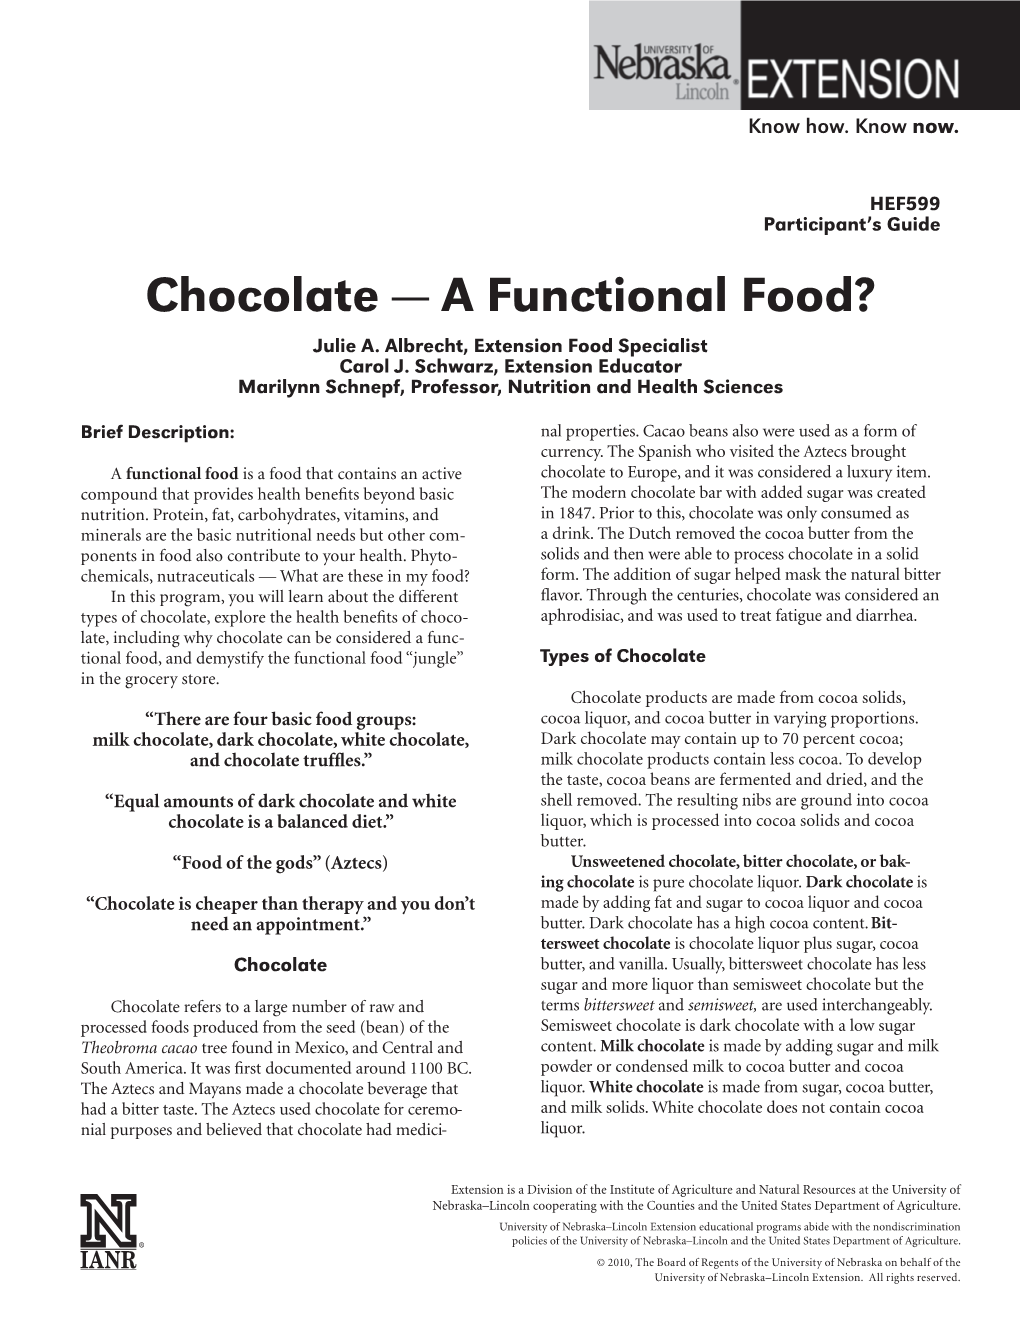 Chocolate — a Functional Food? Julie A